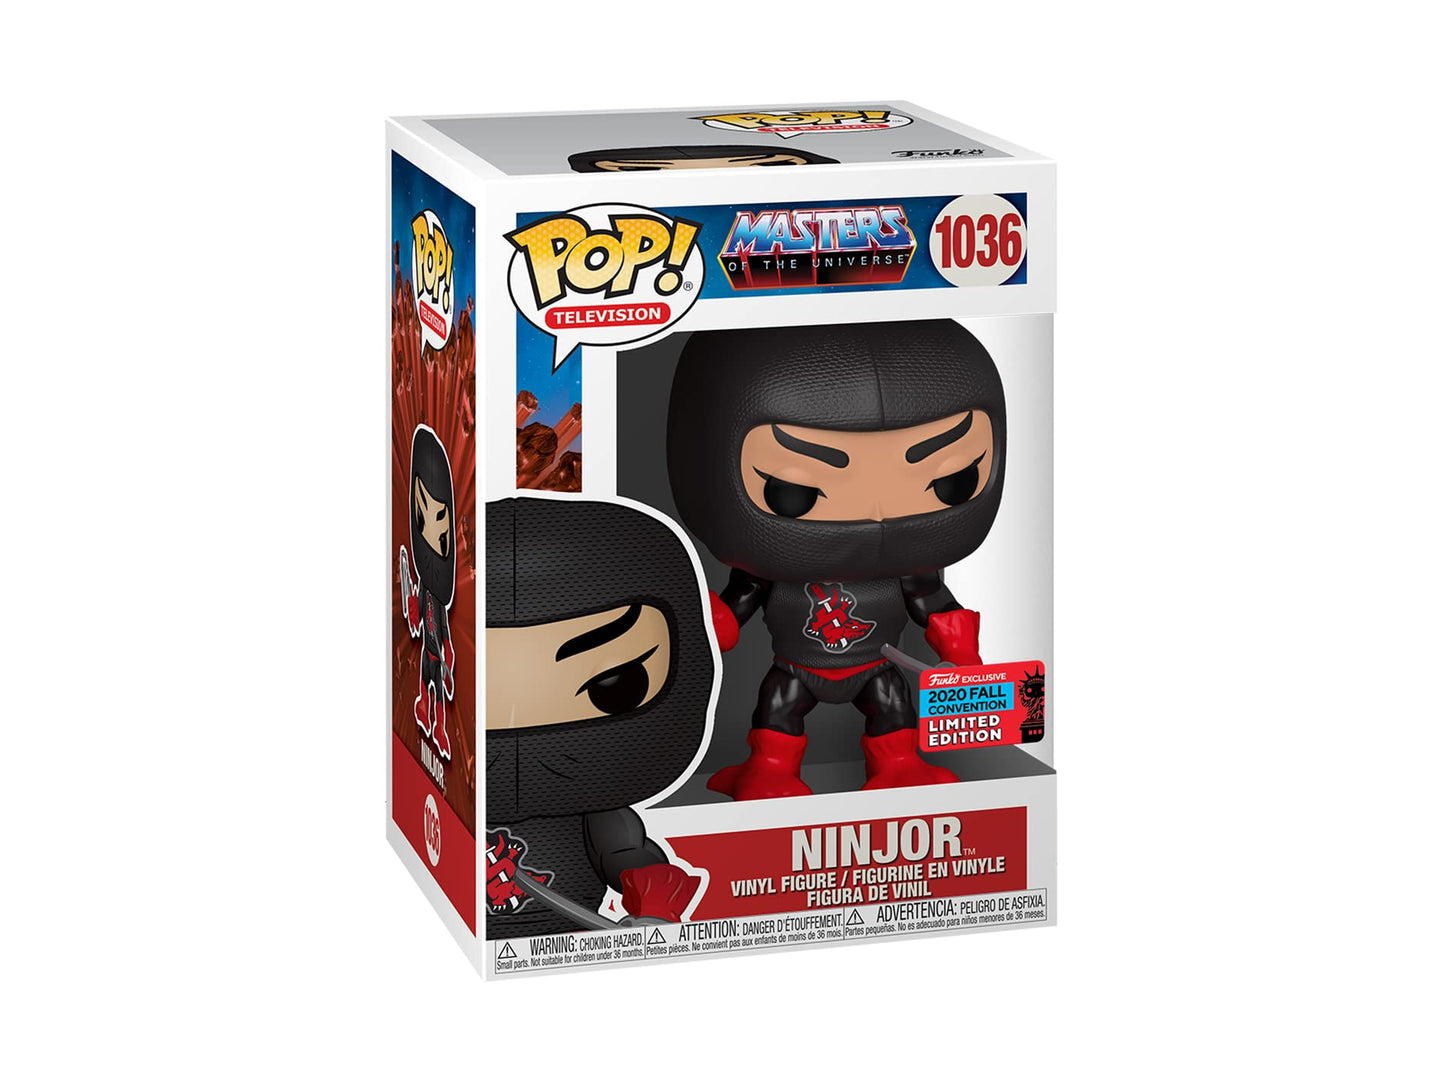 Funko POP! Television: Masters of The Universe Ninjor #1036 2020 Shared Fall Convention Exclusive